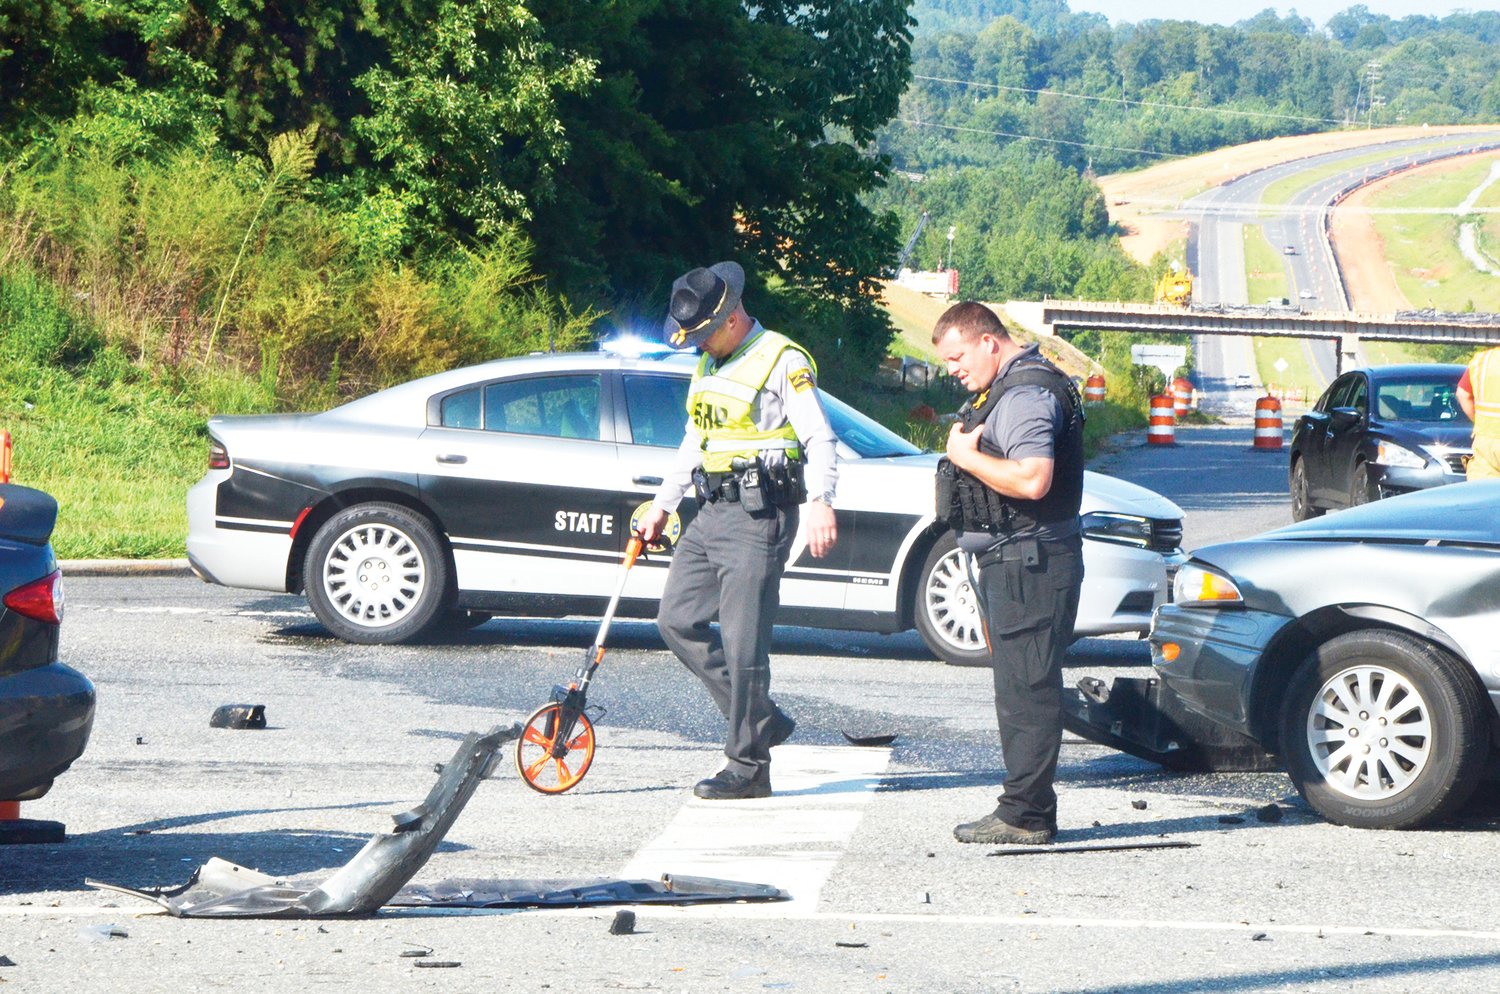 After an accident takes place, State Troopers and other law enforcement personnel have to perform duties, take measurements and other tasks to determine the causes of an accident, and the fault of the incident. The move over law is designed to ensure the safety of the men and women in their jobs as they perform these tasks.